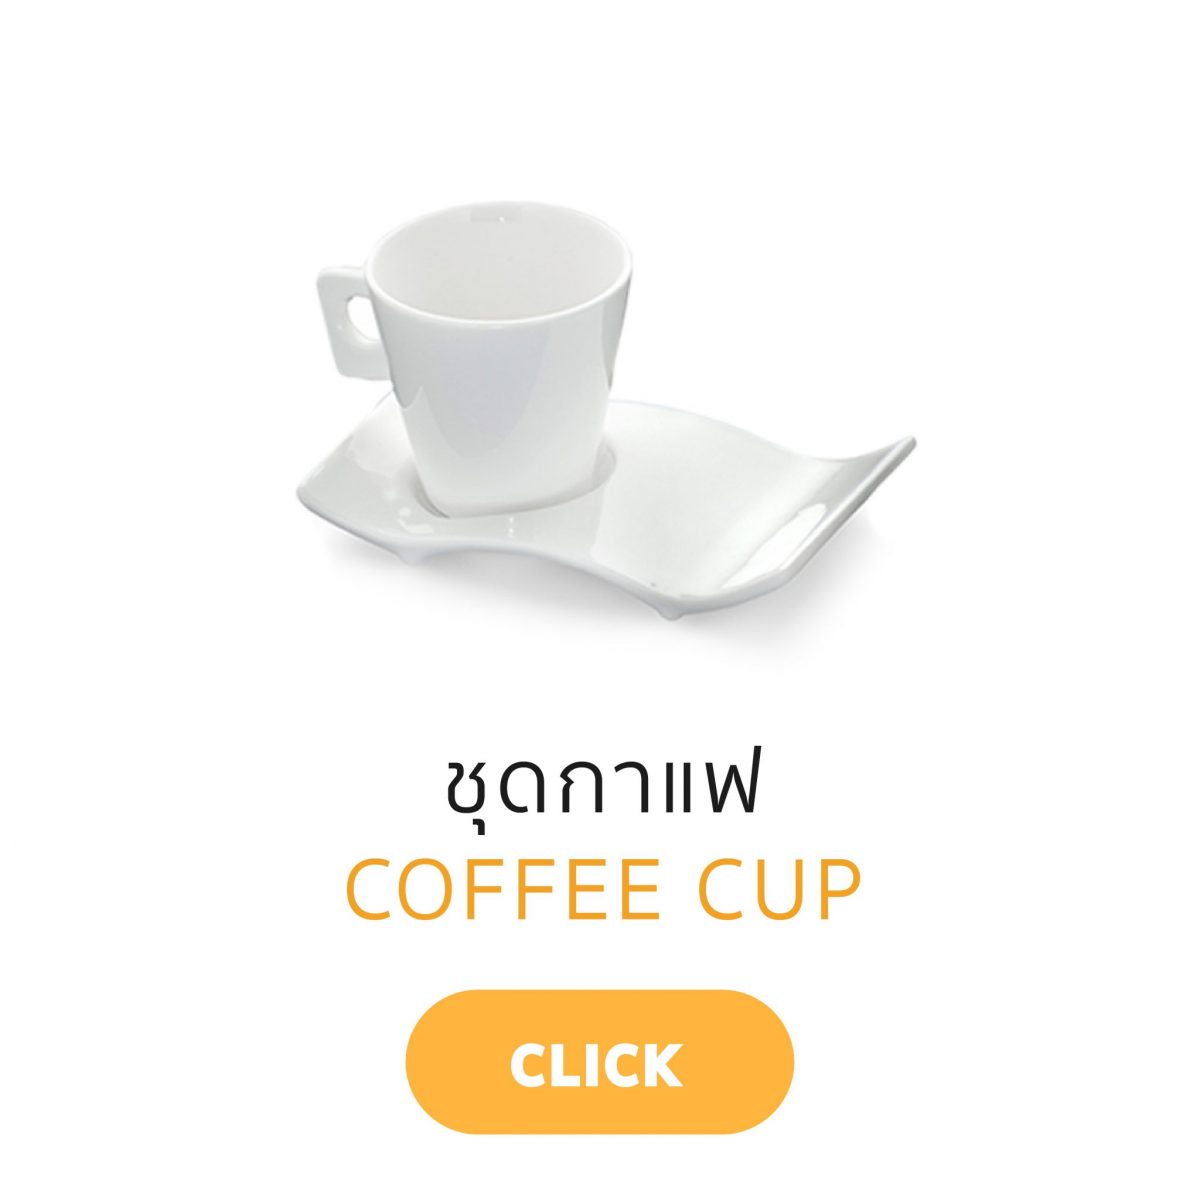 White Porcelain Coffee Cup-Click Here